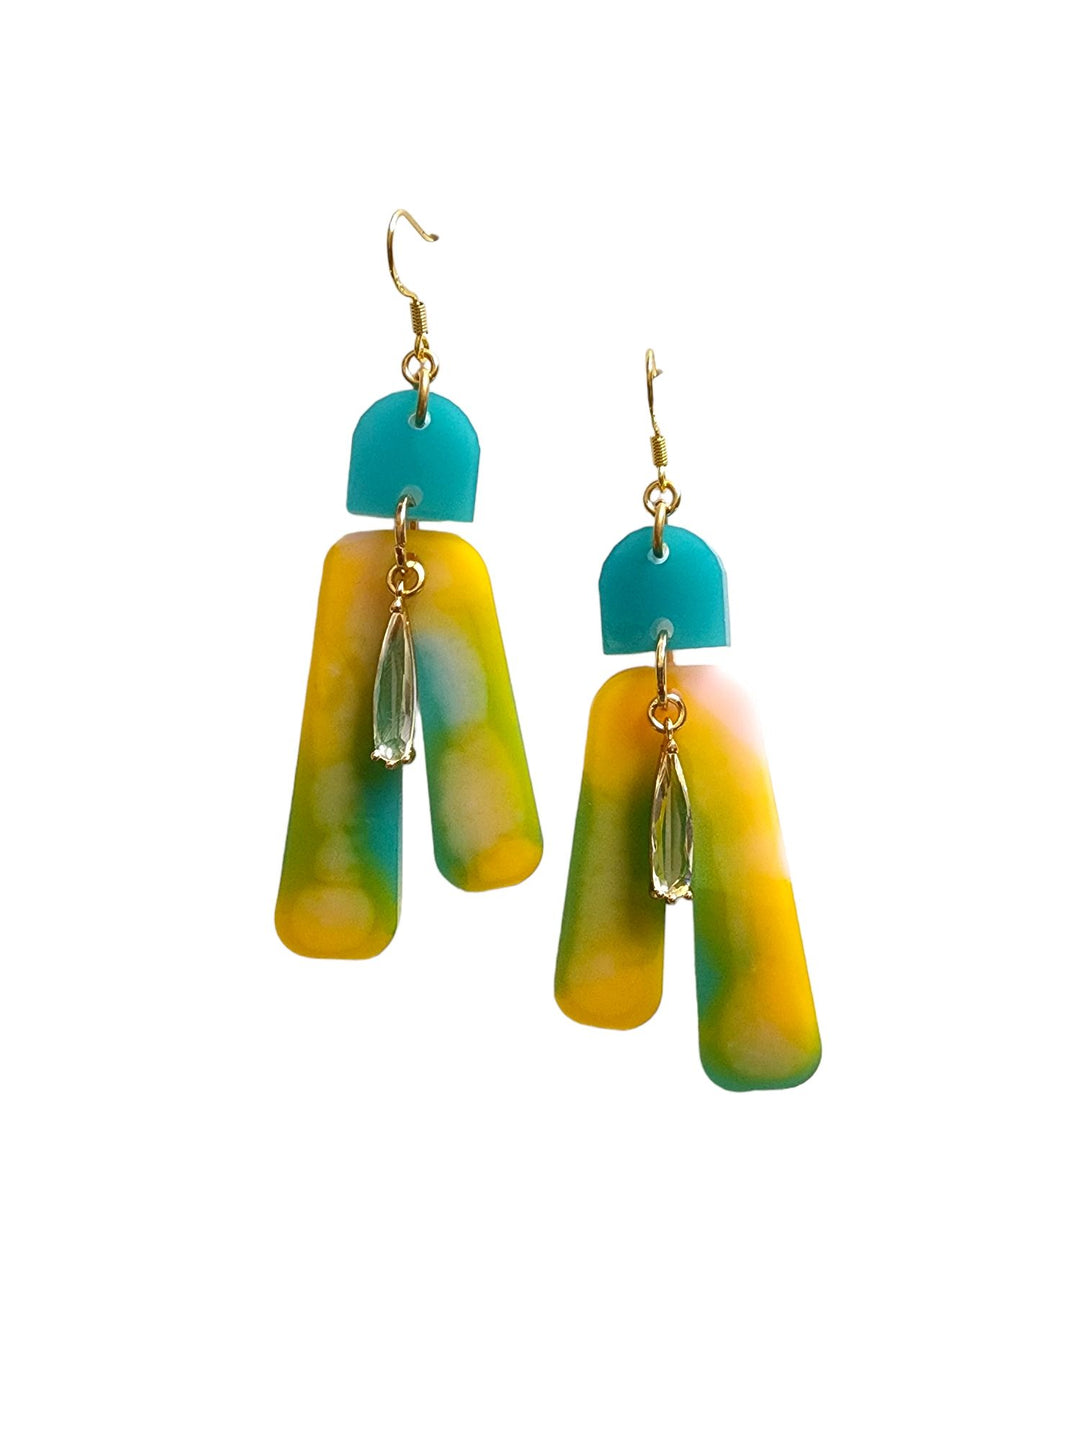 The Amplify Color Resin Earring Collection